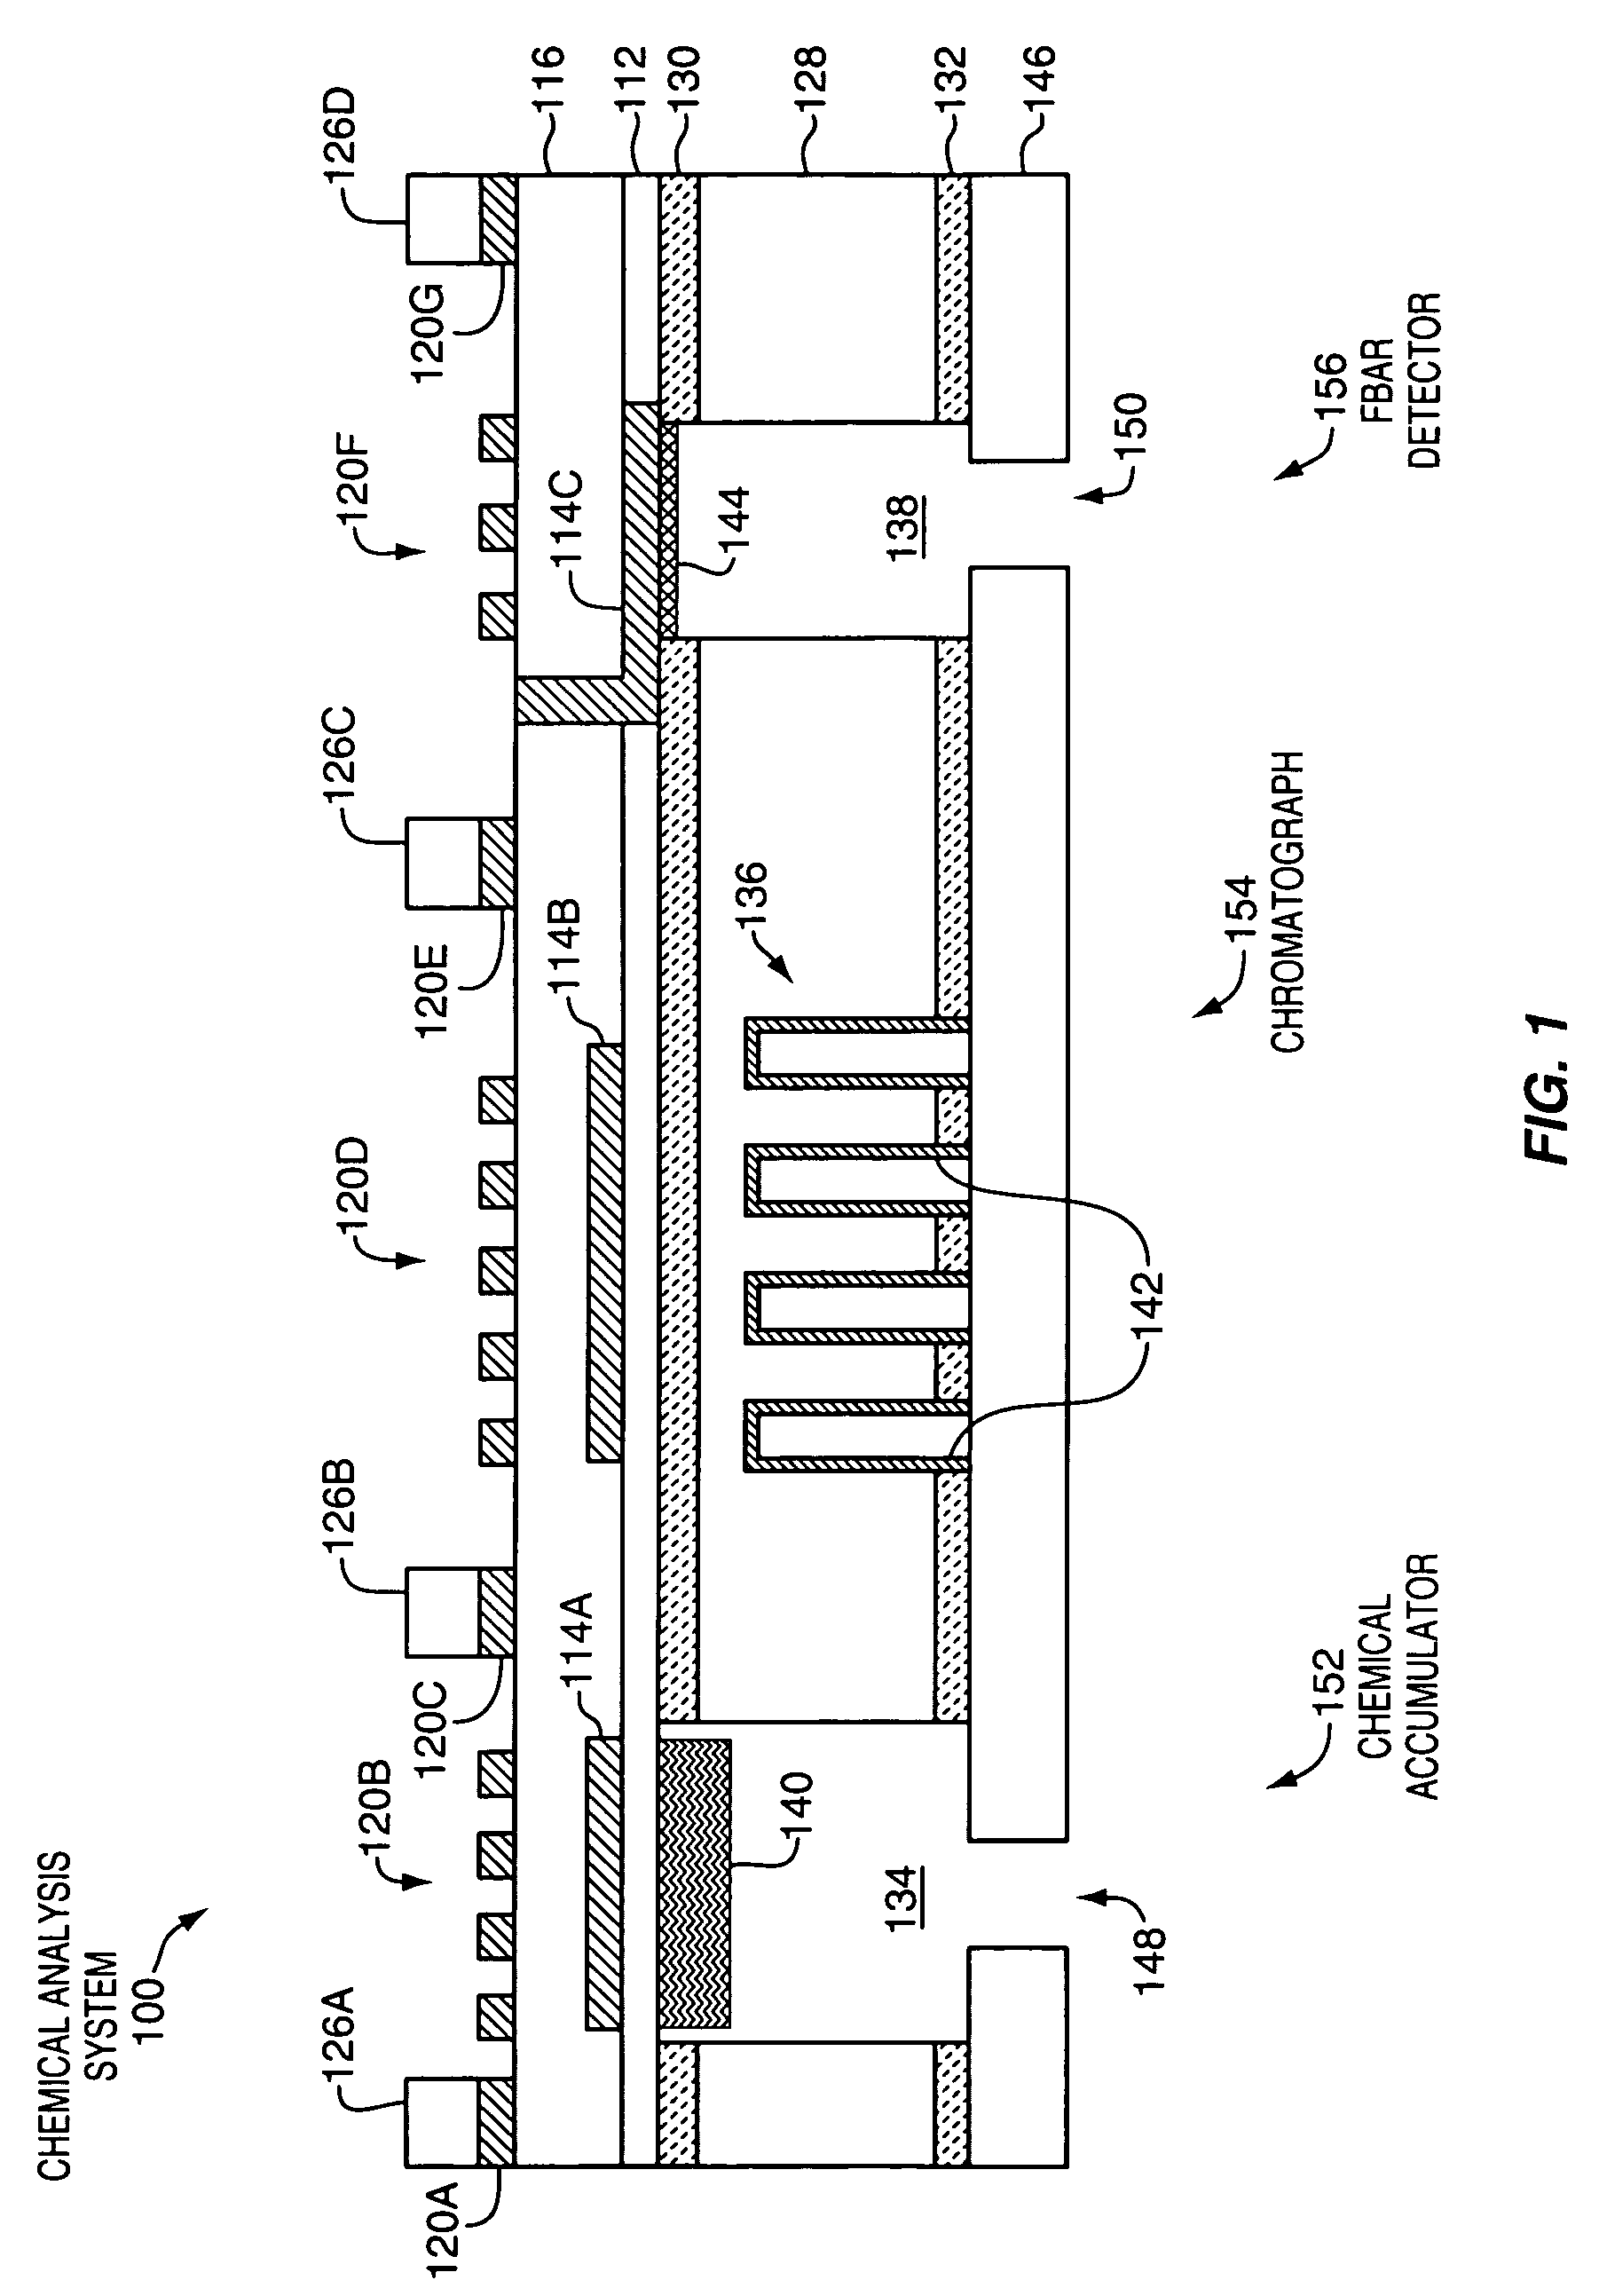 Miniature chemical analysis system